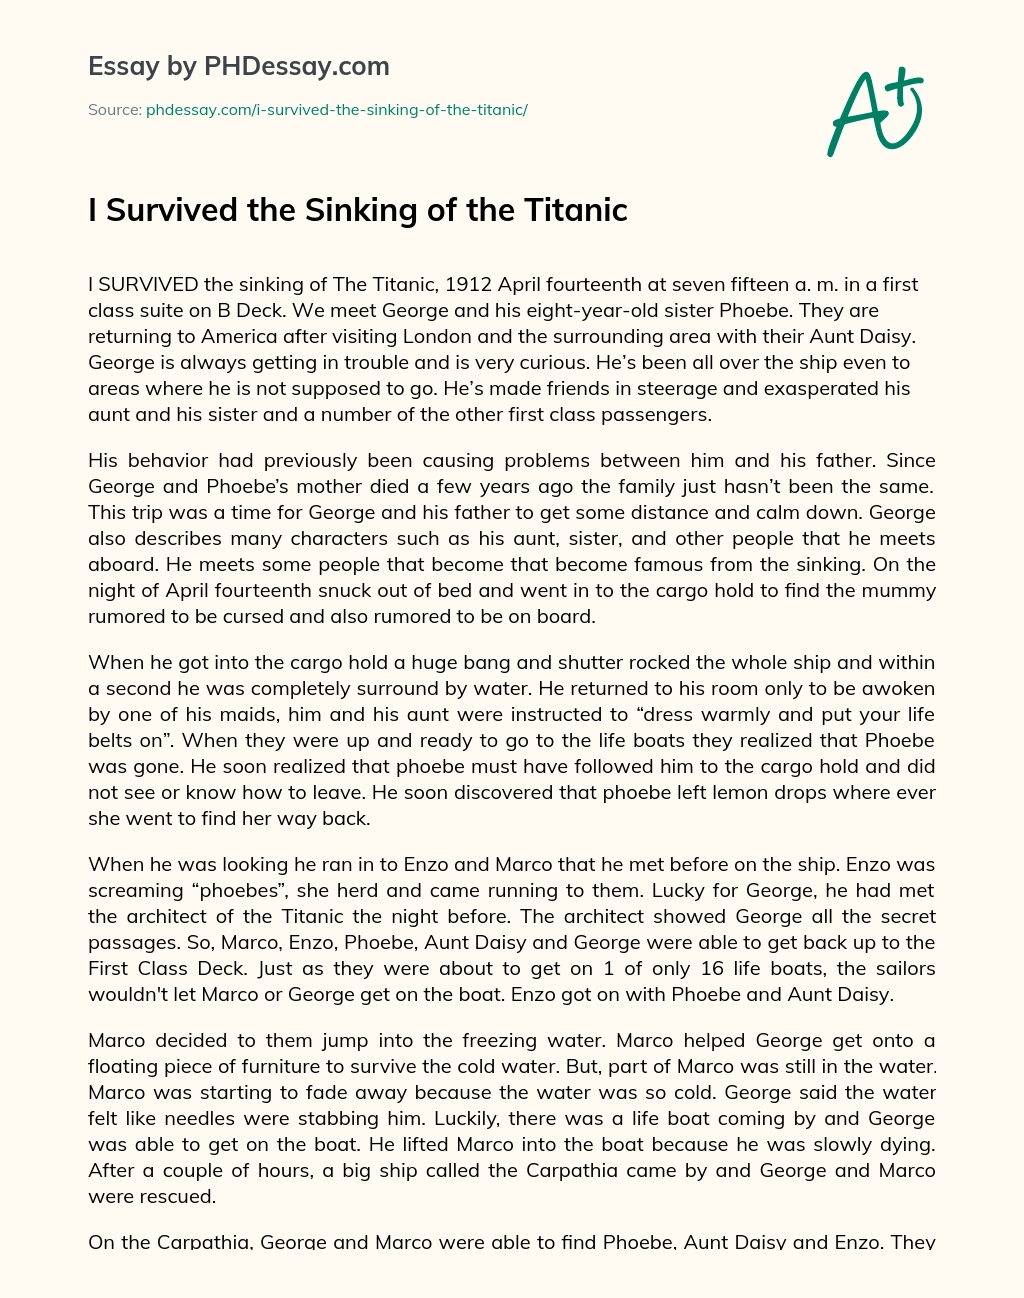 I Survived the Sinking of the Titanic essay